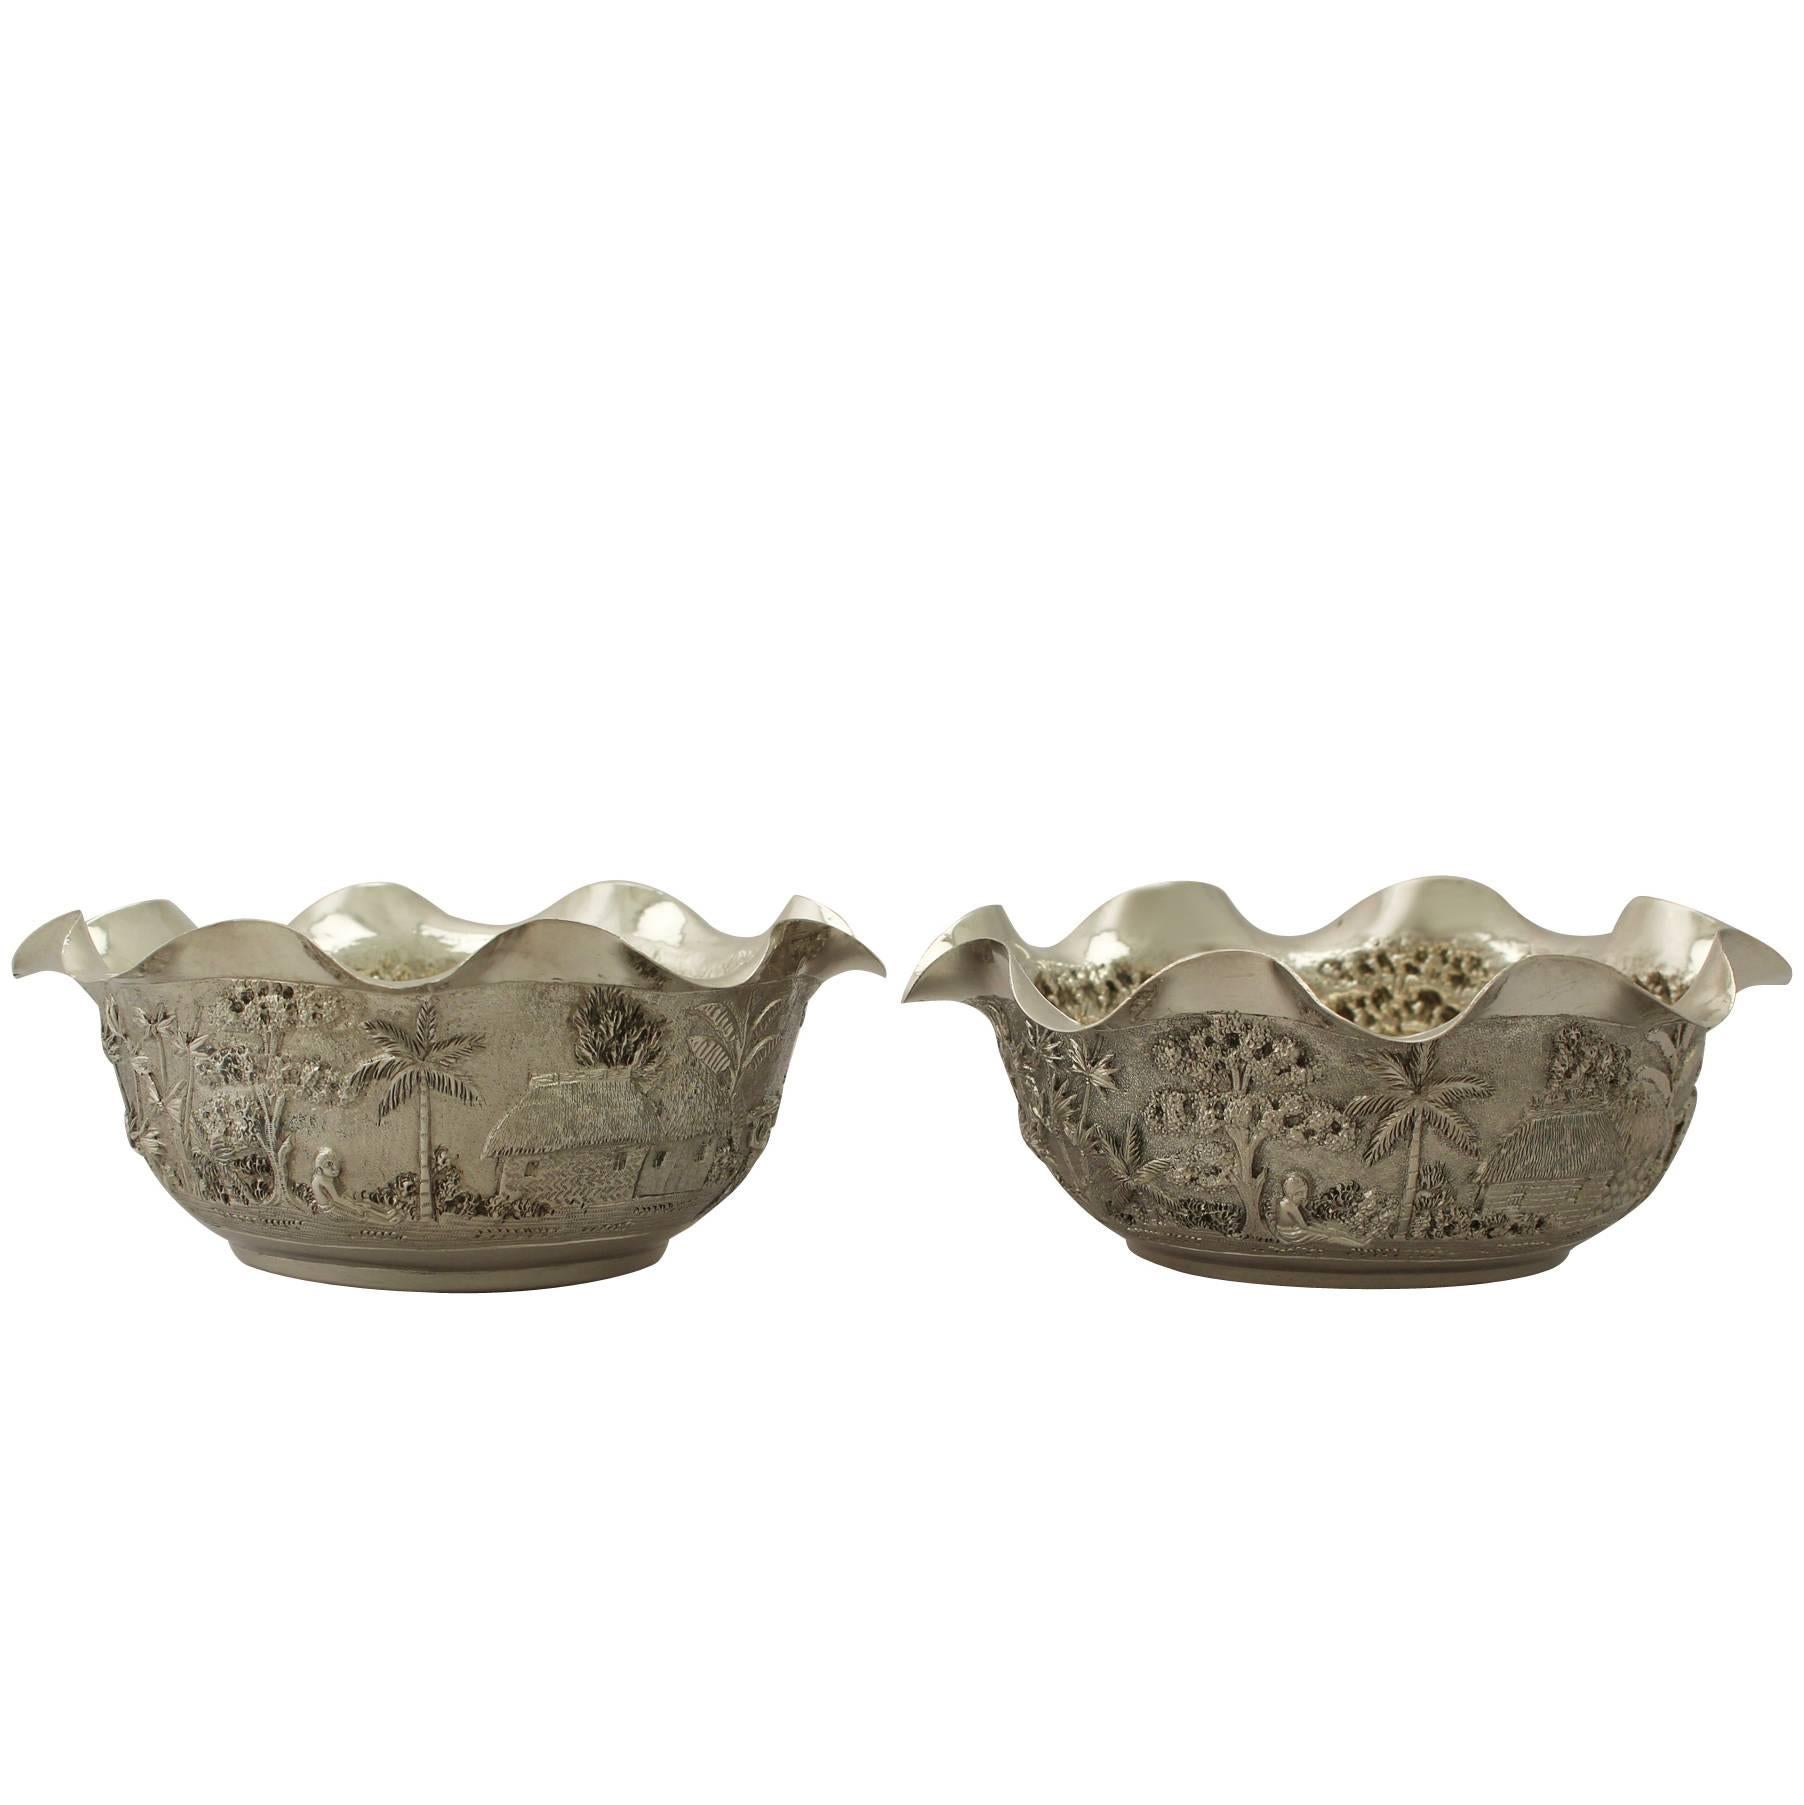 Pair of Antique Indian Silver Bowls